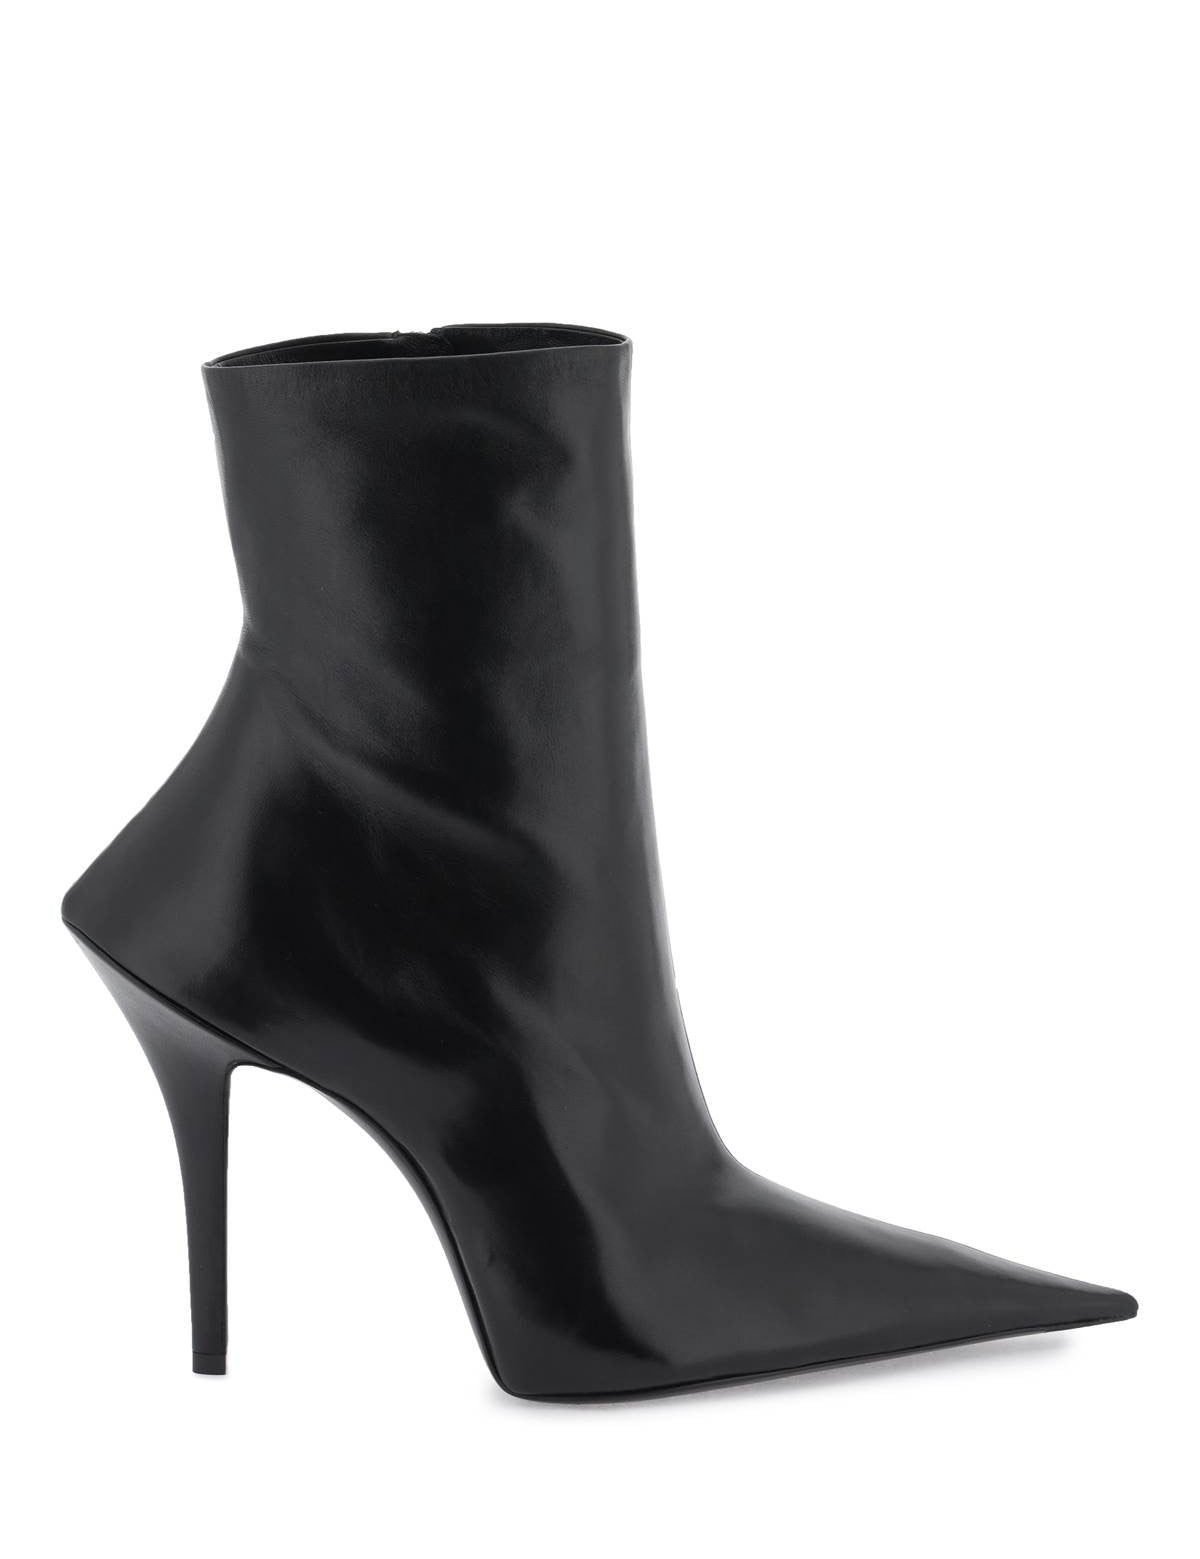 balenciaga-leather-witch-ankle-boots.jpg